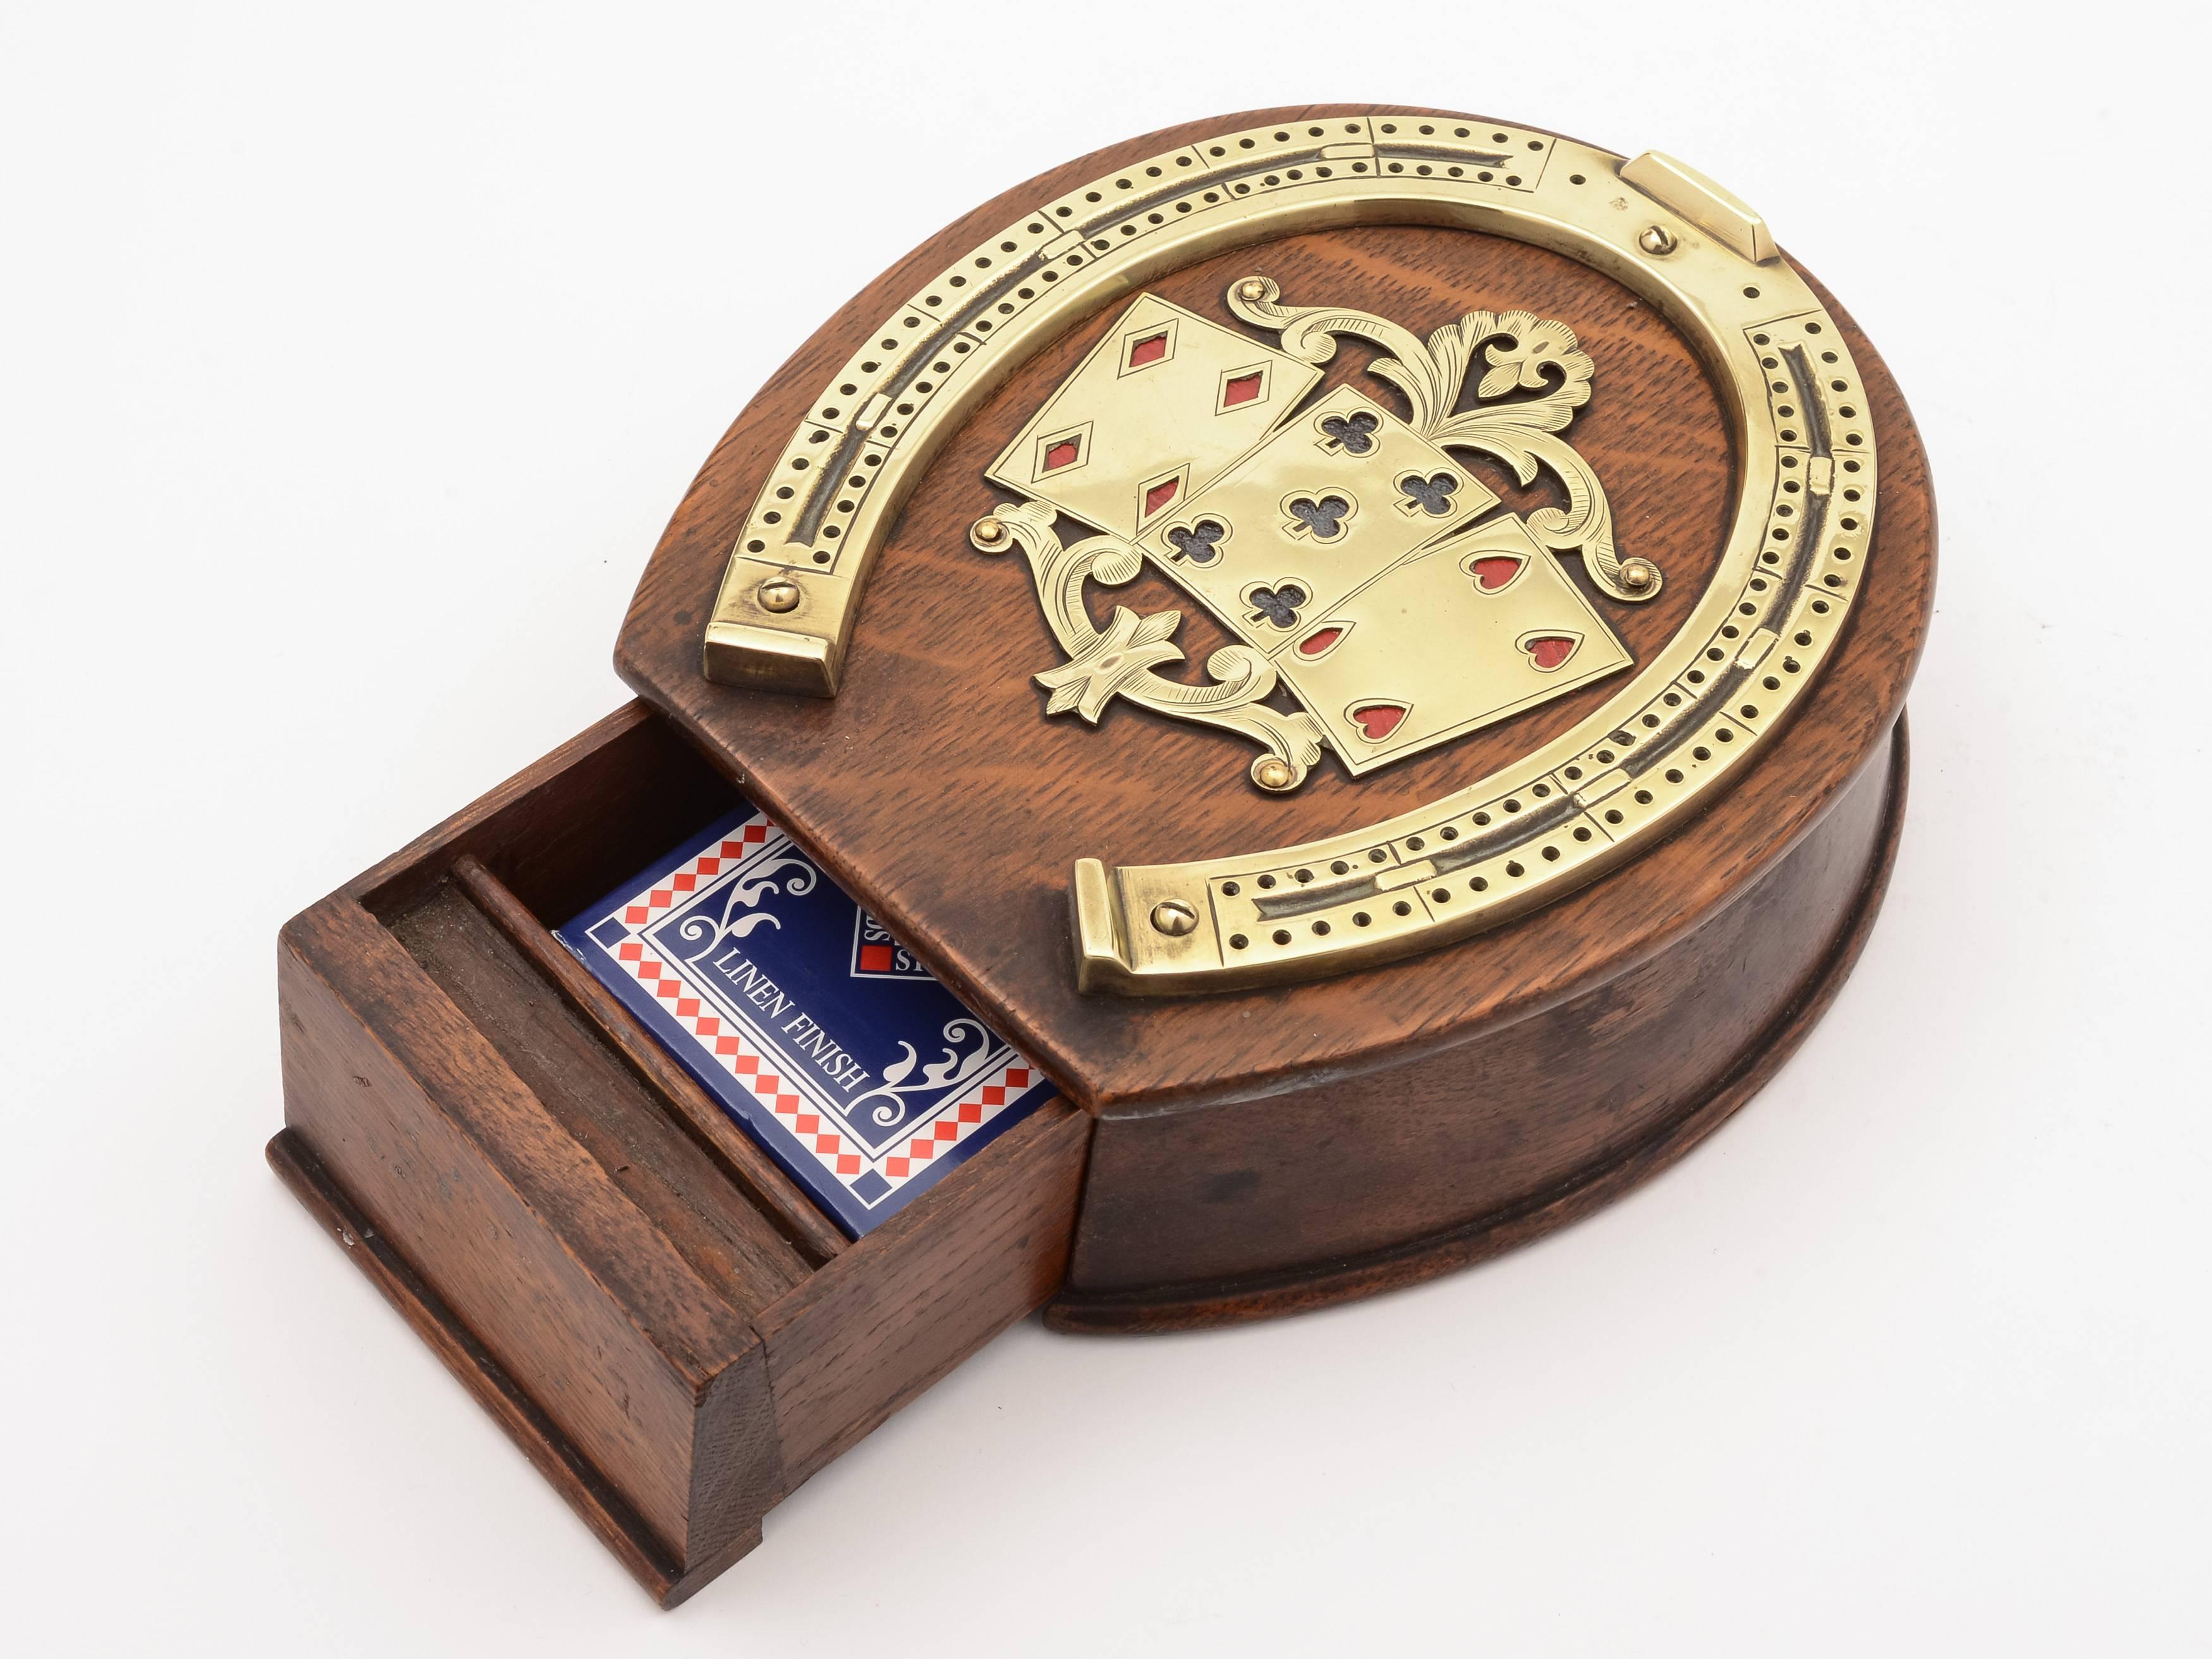 A fabulous English Victorian oak and brass horse shoe-shaped cribbage board. Has card drawer and holes for markers, circa 1890. (Cards not included)

Worldwide, first class, tracked and signed for delivery is included in the